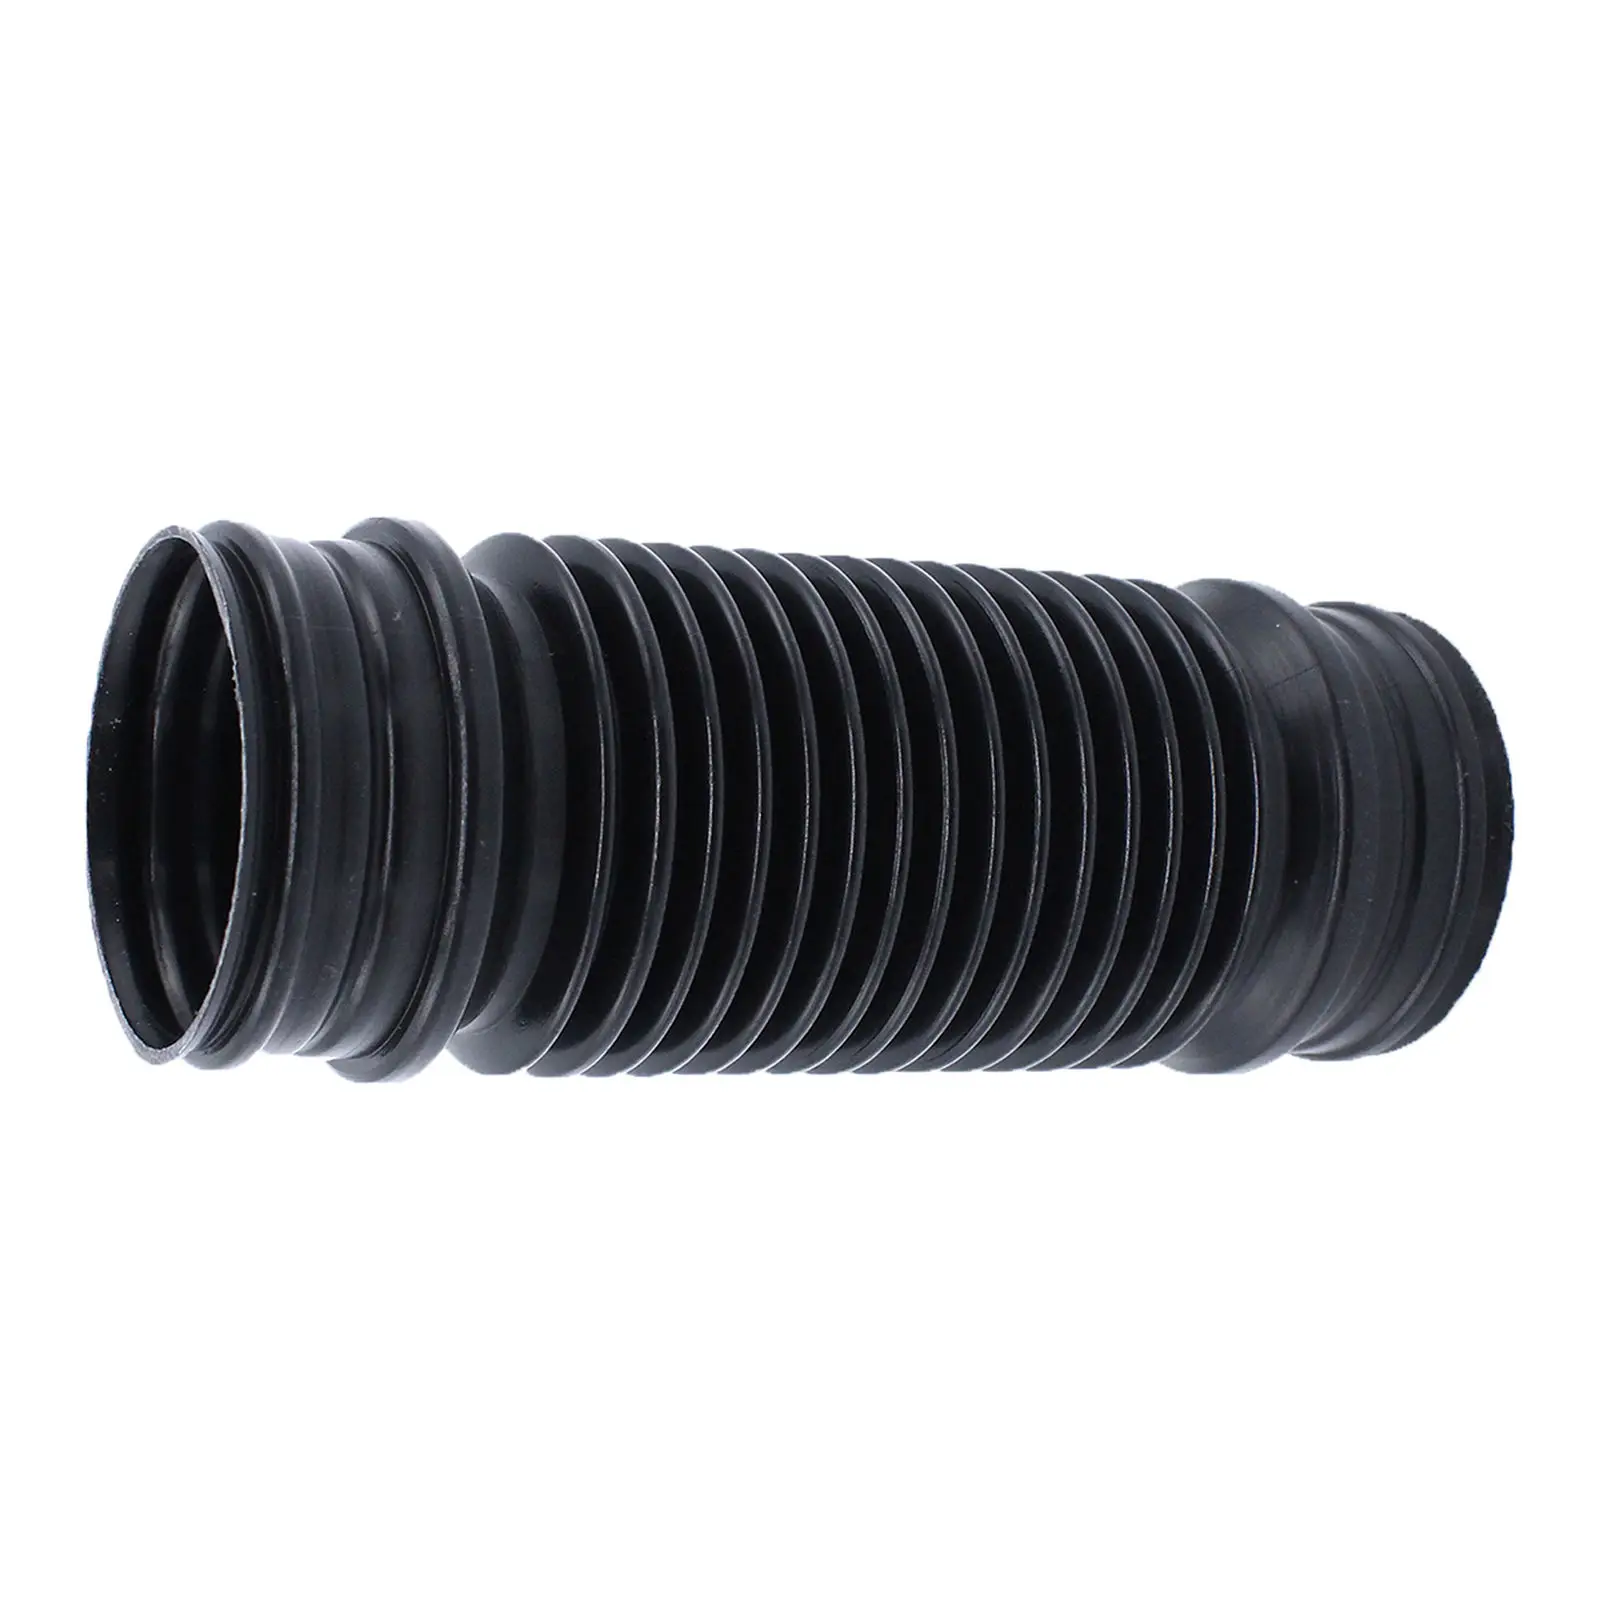 Intake Control Air Hose Pipe 1J0129618B for VW Golf 98-06 Air Intake Tube Cleaner Hose Replacement Accessories